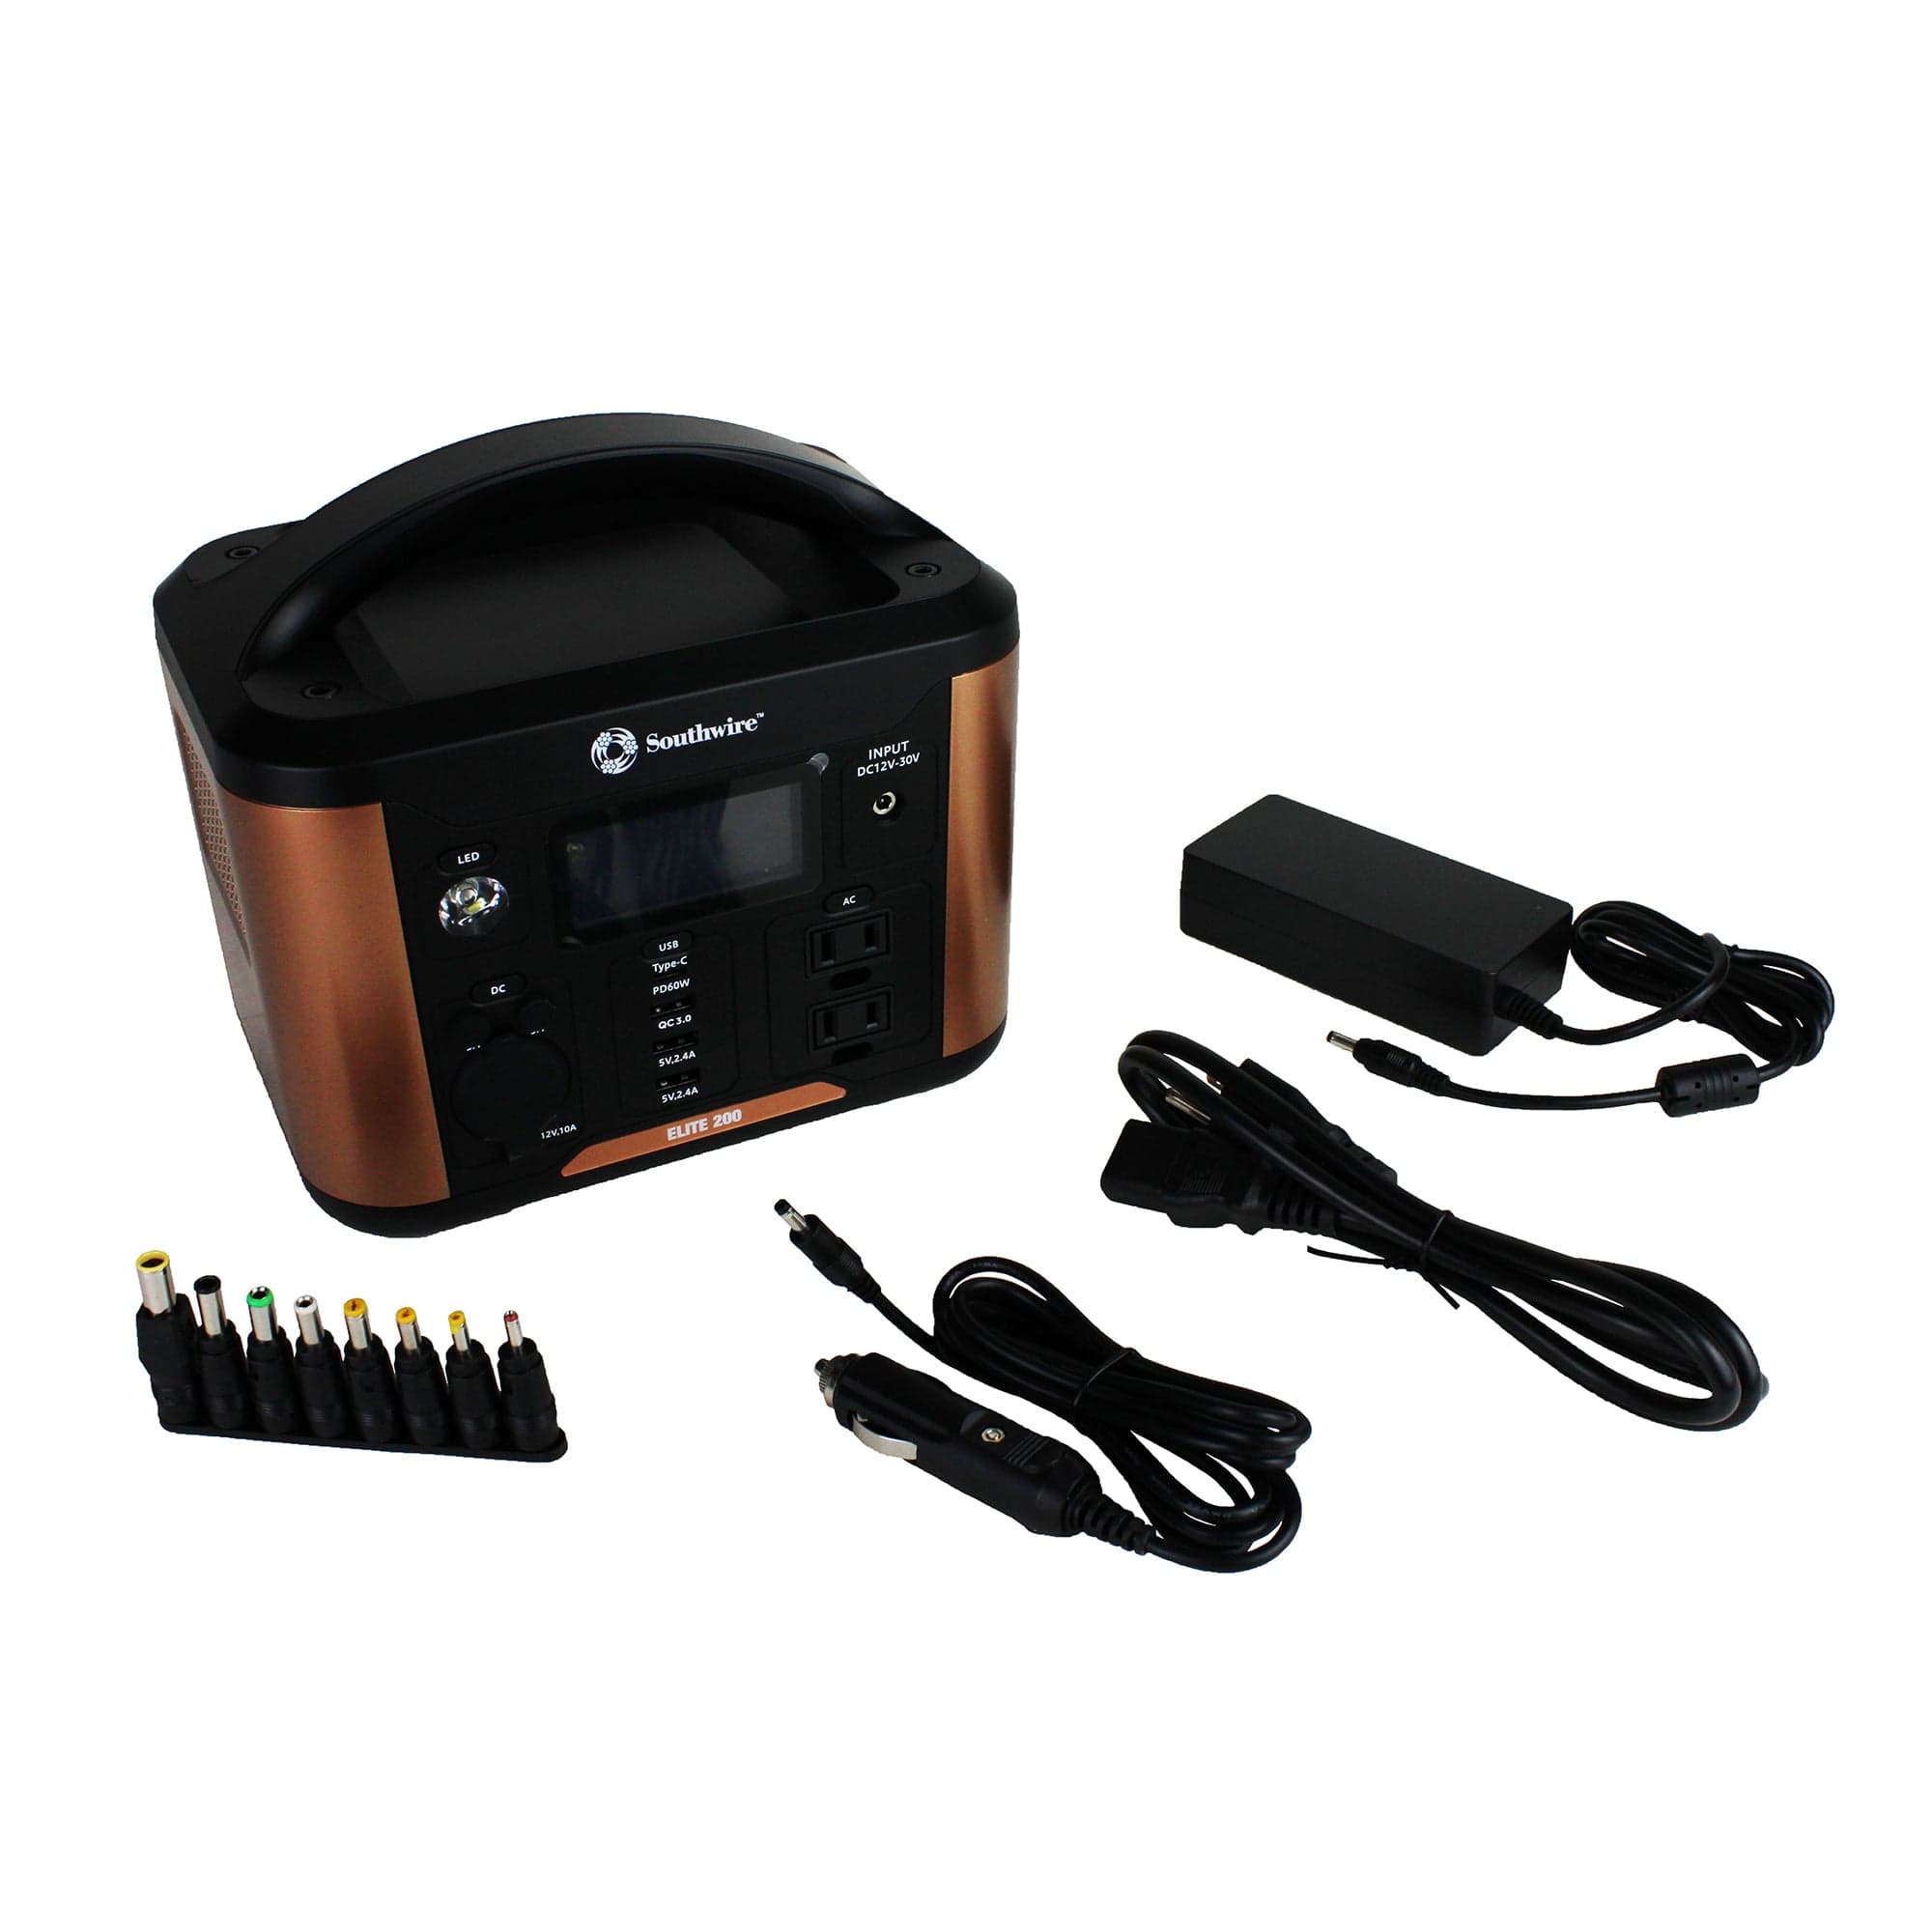 Southwire 53250 Elite 200 Series Portable Power Station W/ AC & DC Adapters